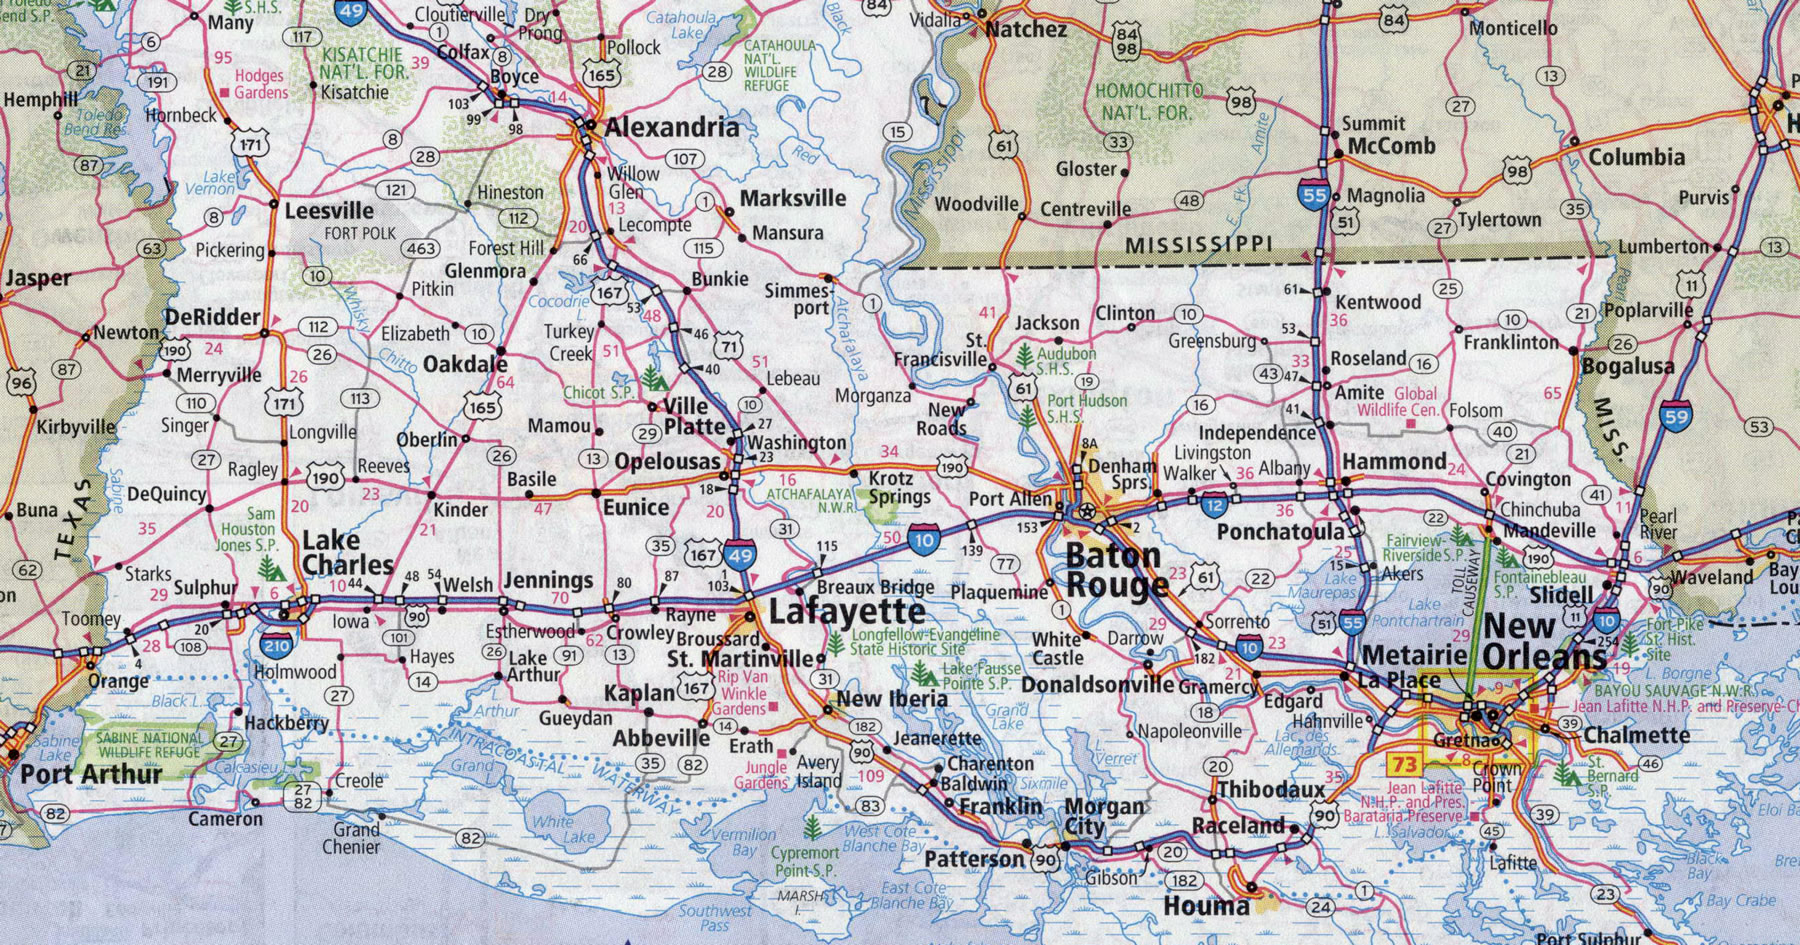 louisiana-road-map-1800 - Adoptee Rights Law Center